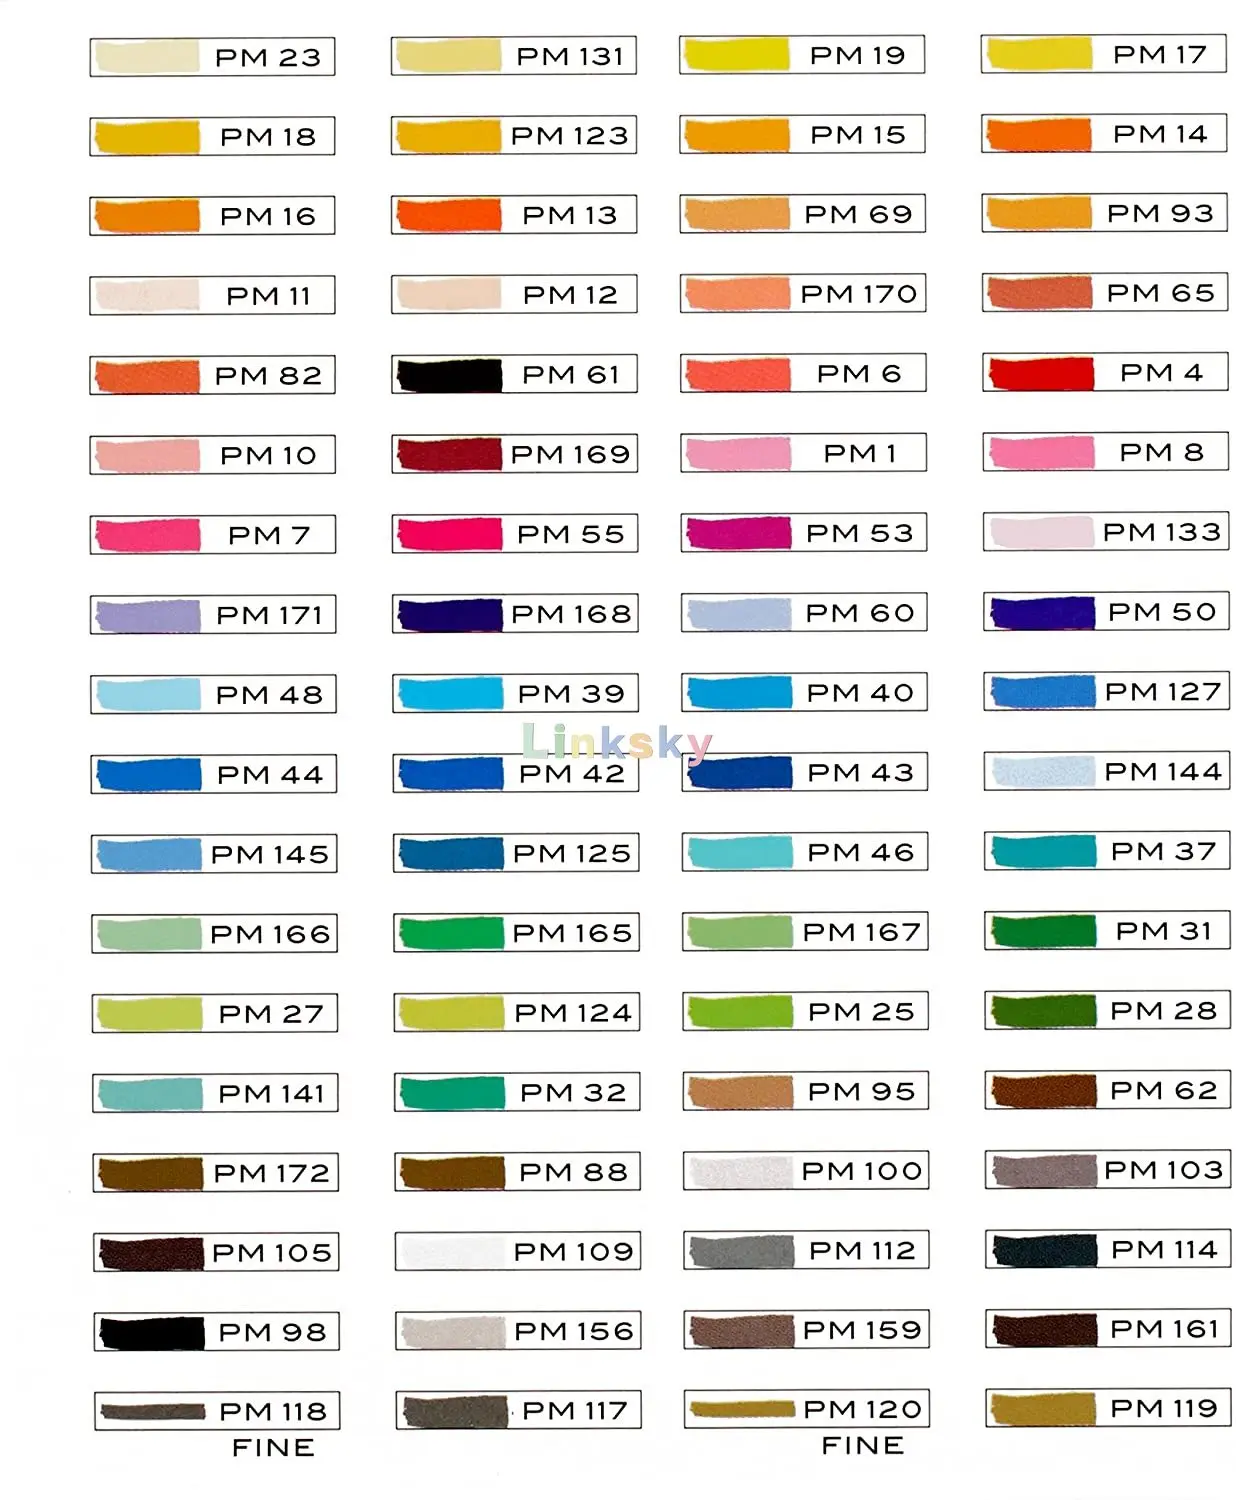 Prismacolor 3722 Premier Double-Ended Art Markers, Fine and Chisel